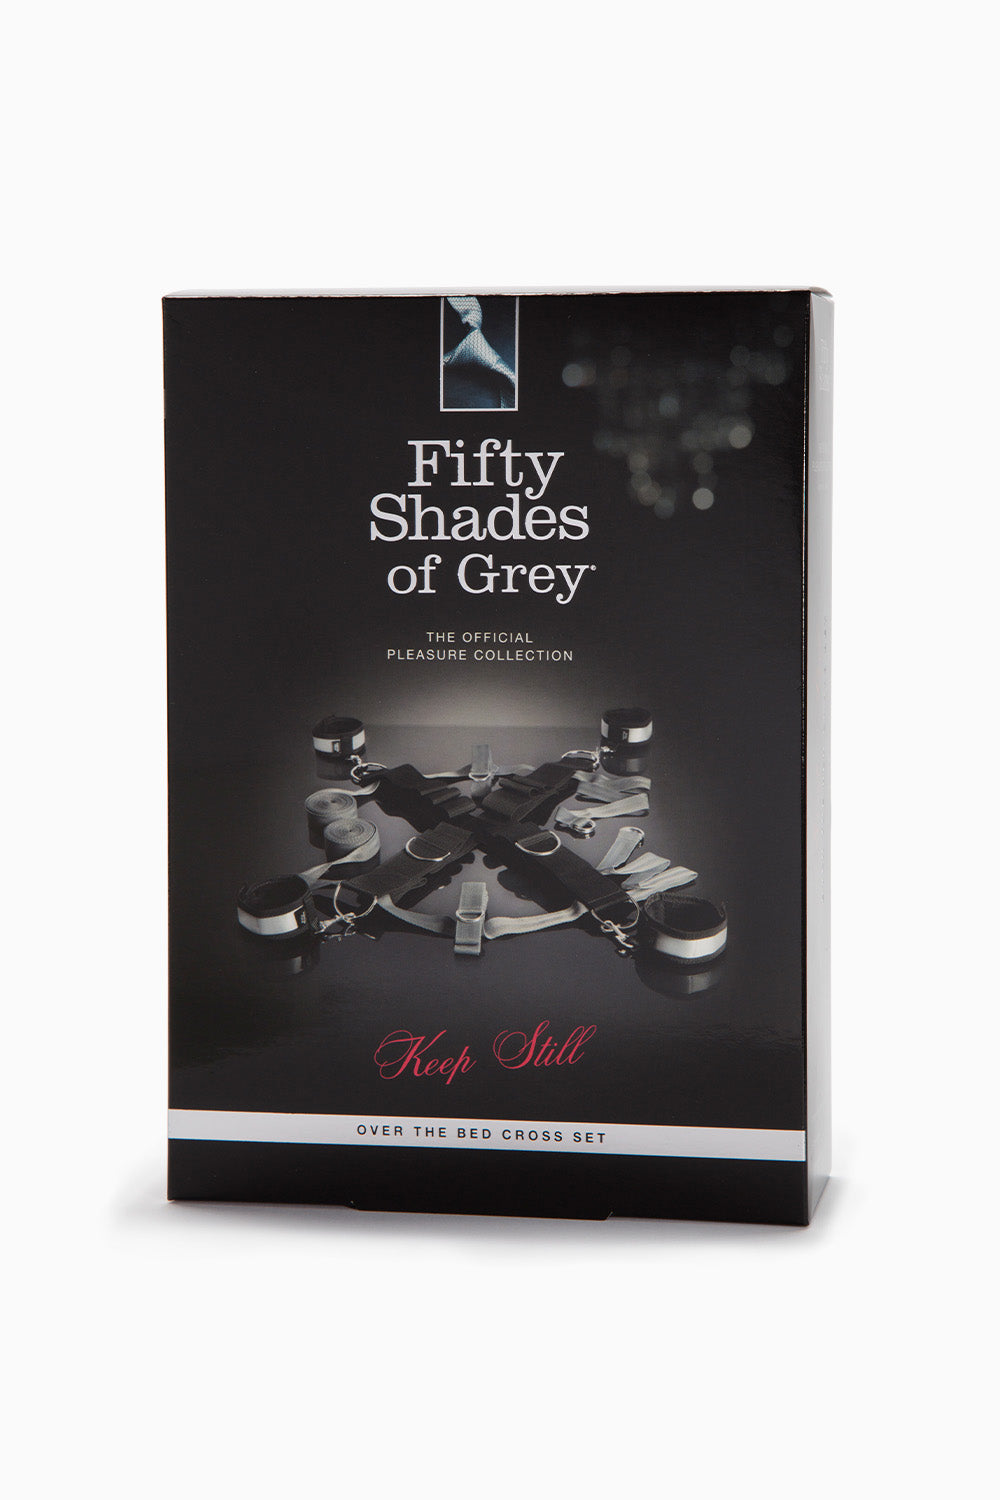 Fifty Shades of Grey Keep Still Over the Bed Cross Restraint Silver